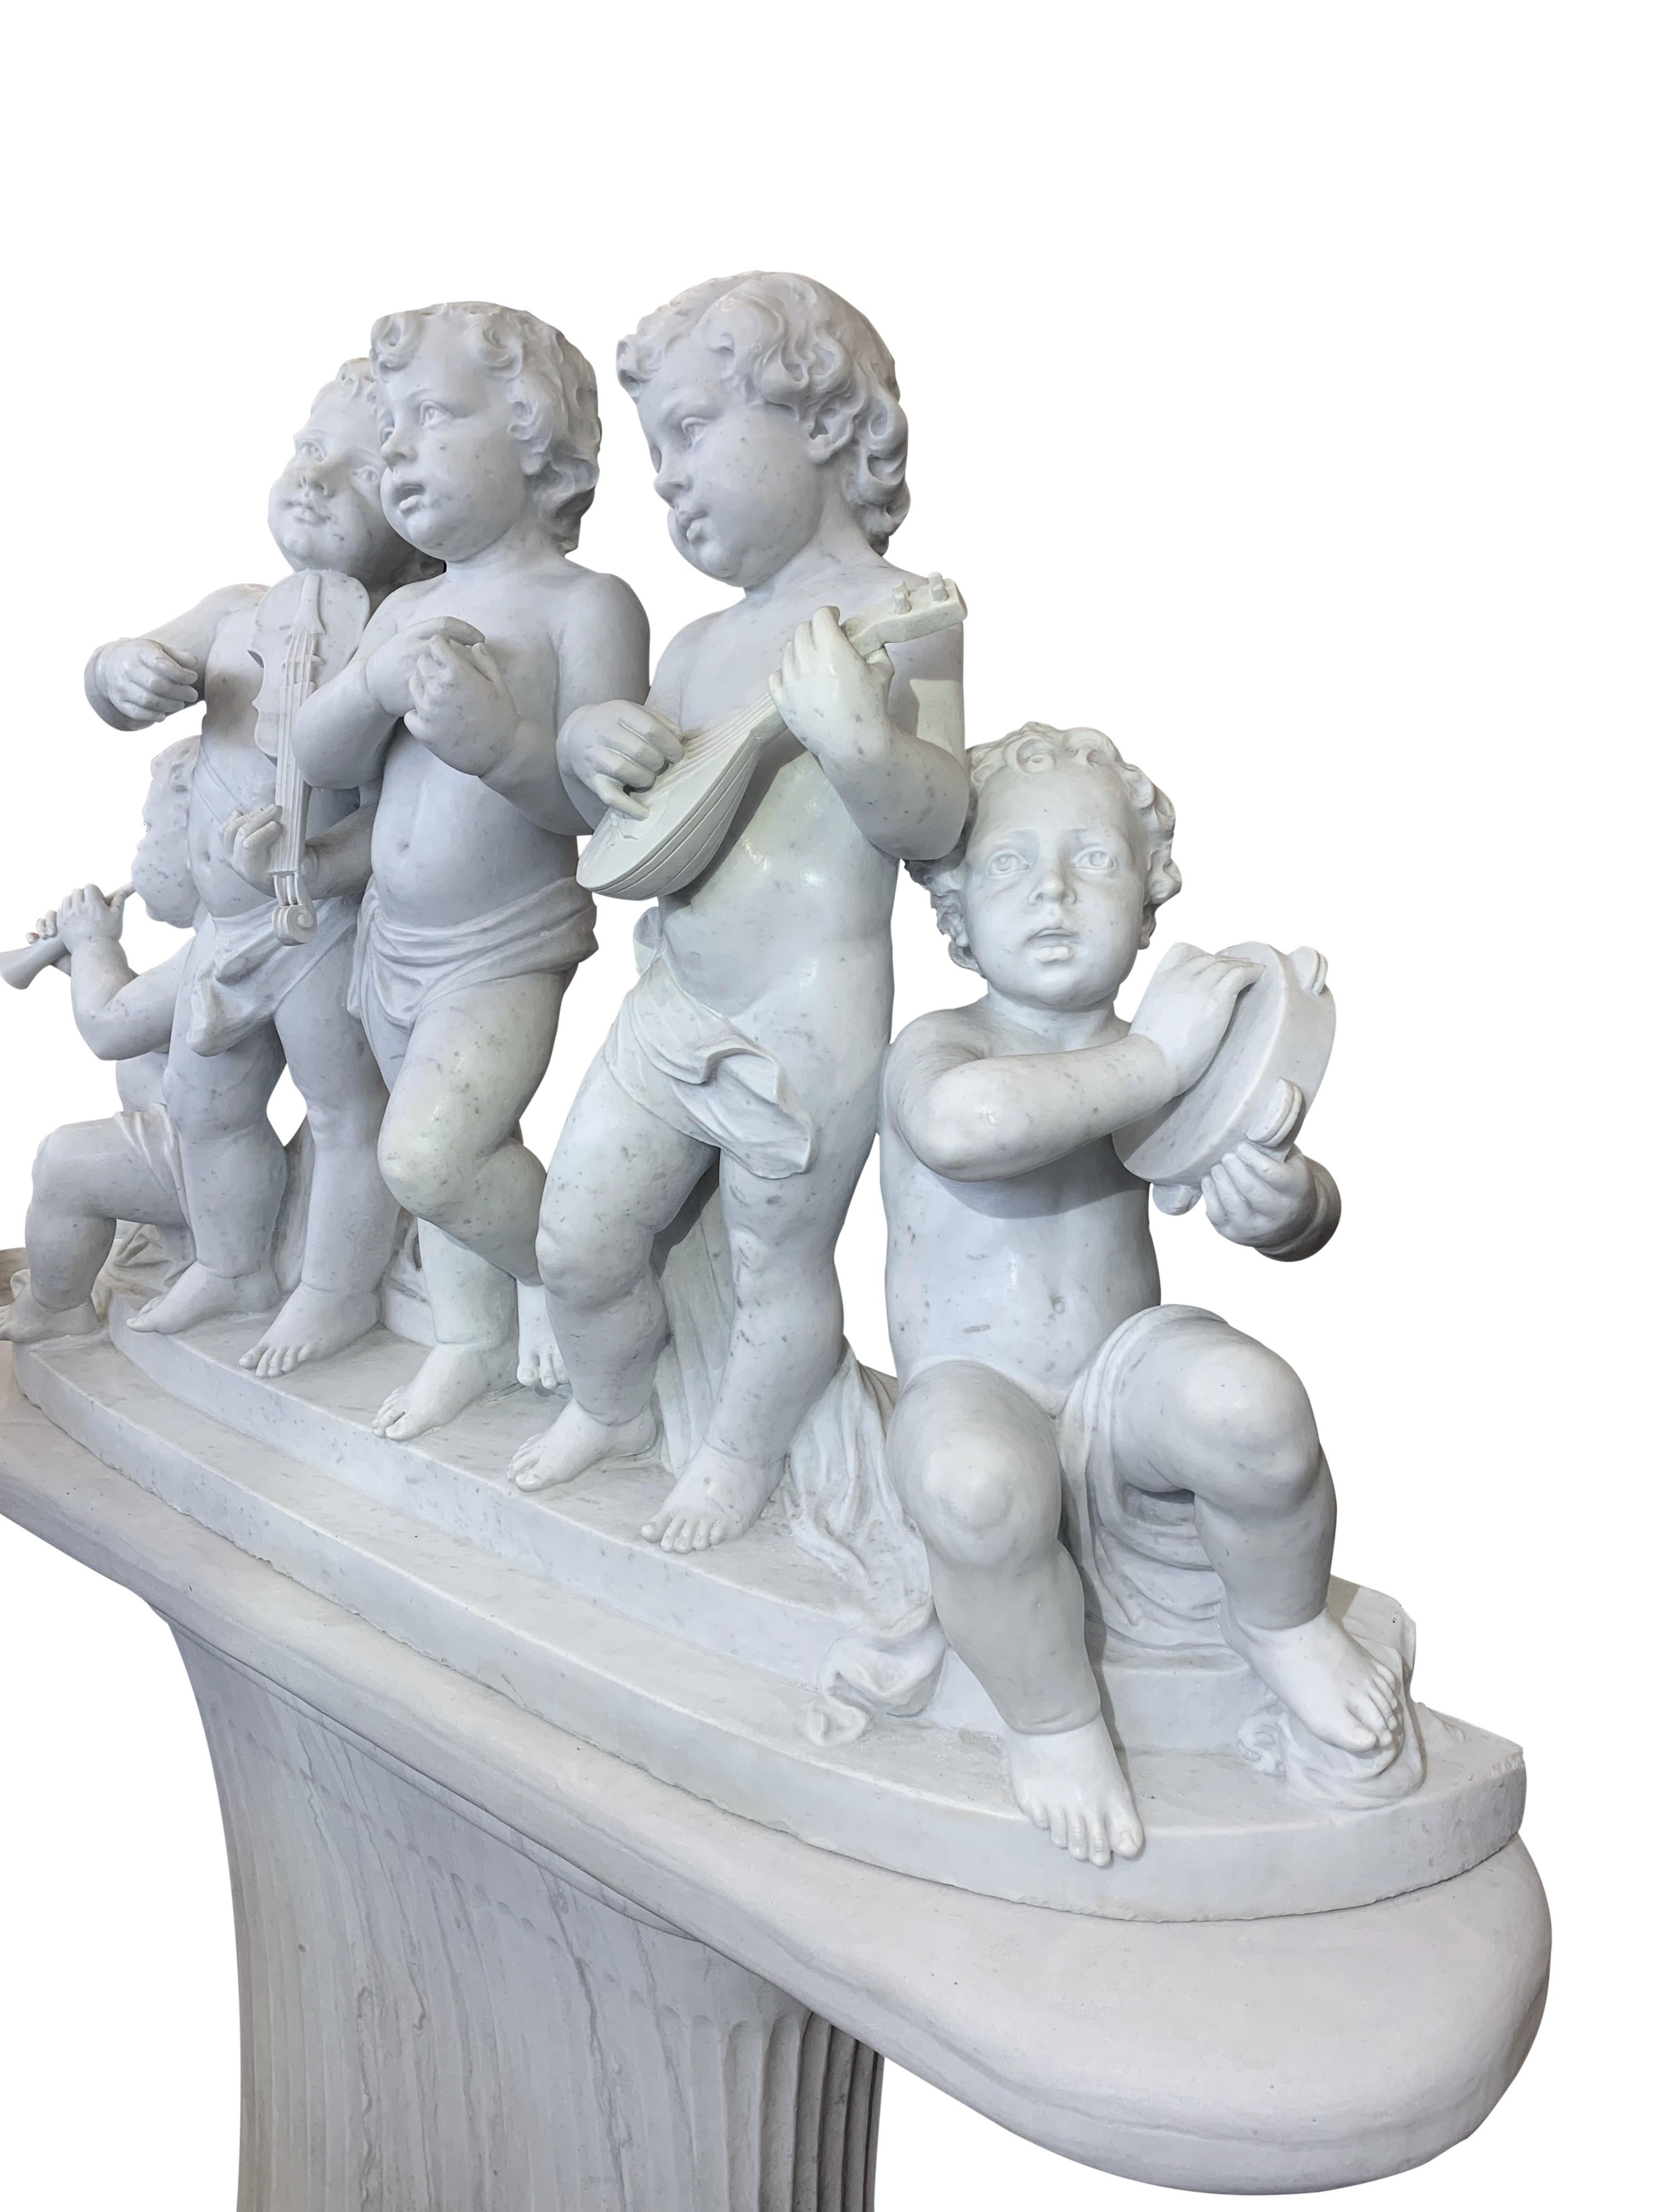 Large 19th Century Italian Carved Marble Group Depicting Musicians  on stand 4